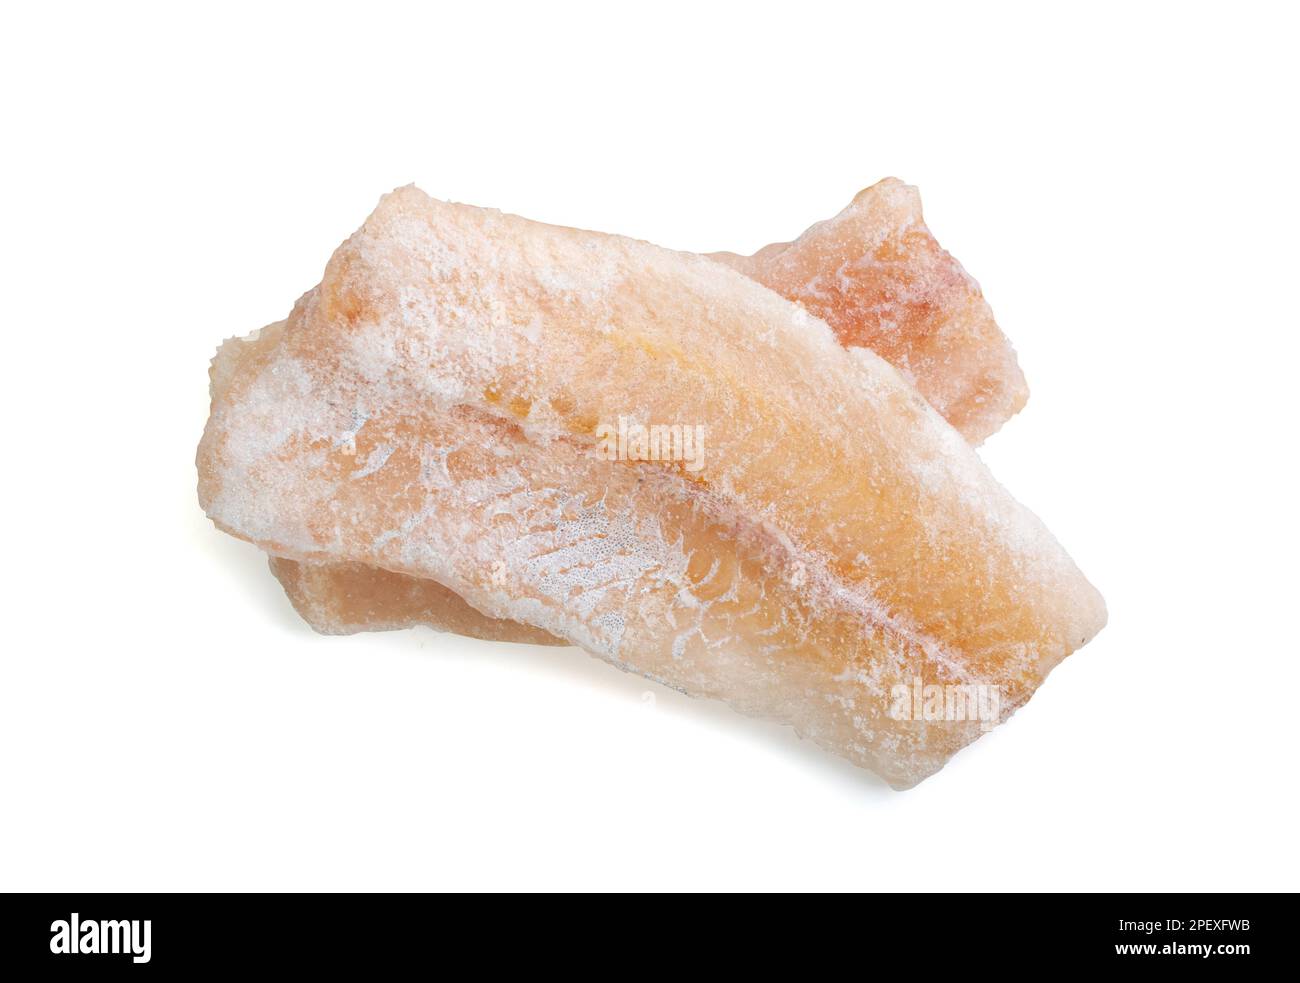 Frozen Fish Isolated, White Cod Fillet, Iced Hake Filet, Frozen Pollock Meat on White Background Stock Photo